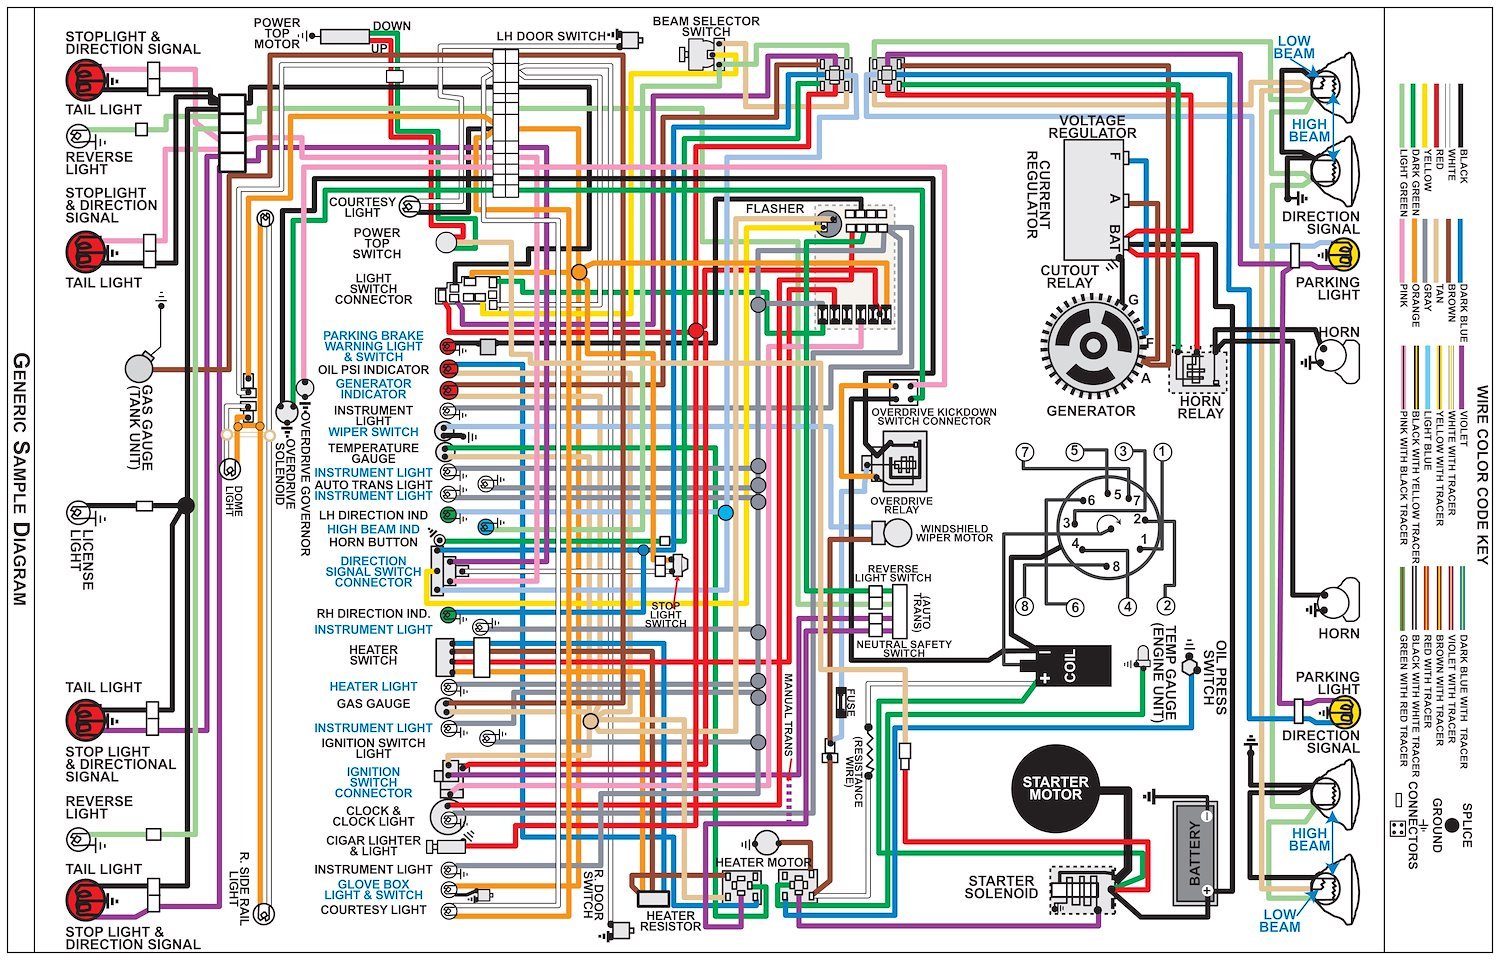 Wiring Diagram for 1962 GMC Truck, 11 in. x 17 in., Laminated